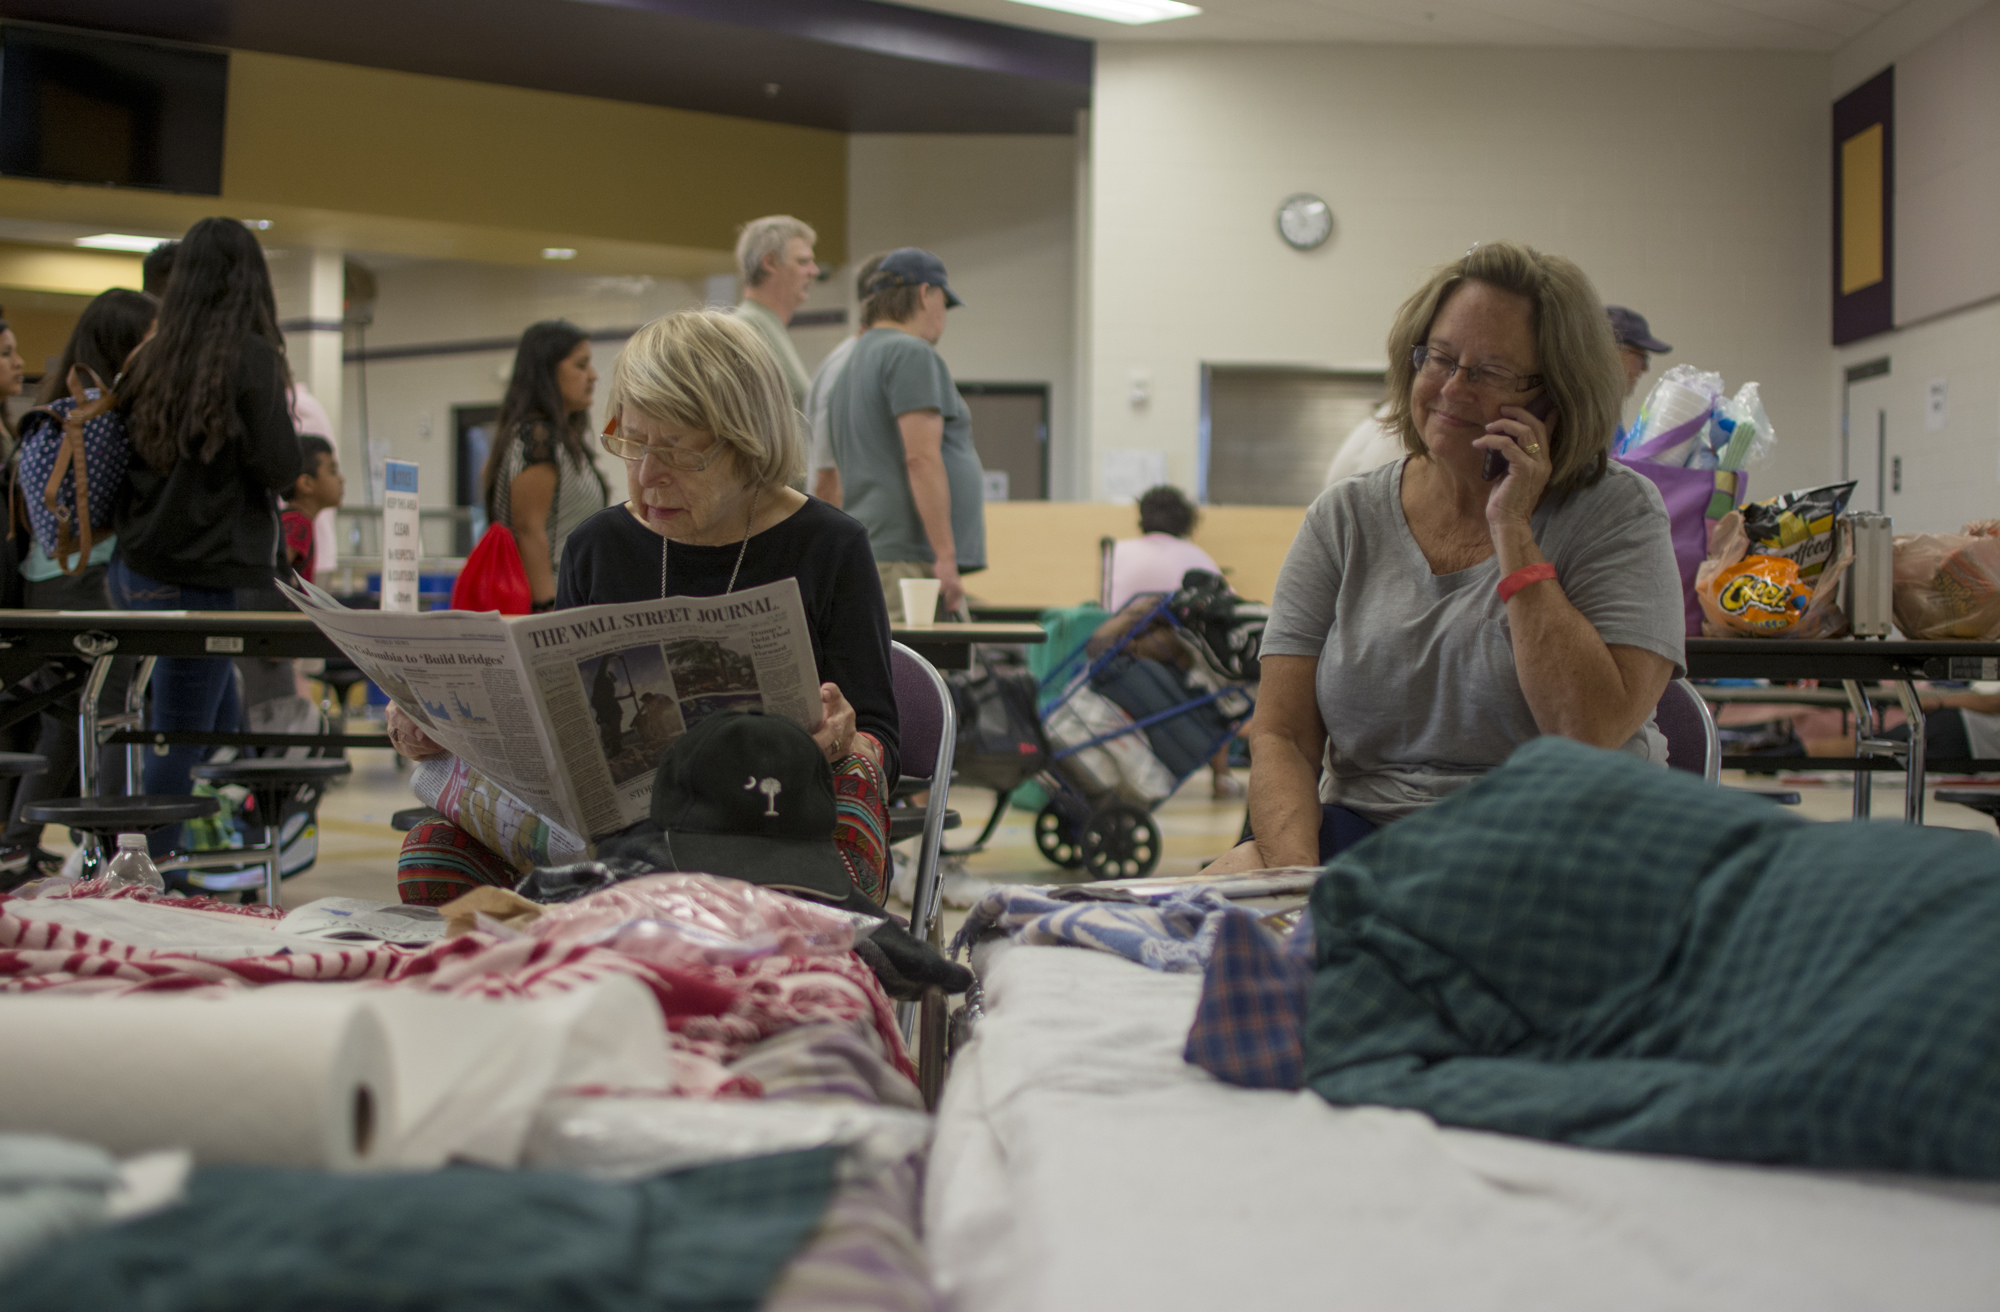  Larissa Green reads the Wall Street Journal while her daughter Ann Green West talks on the phone at Booker High School on Saturday. The pair arrived with Howard Green on Friday night. 